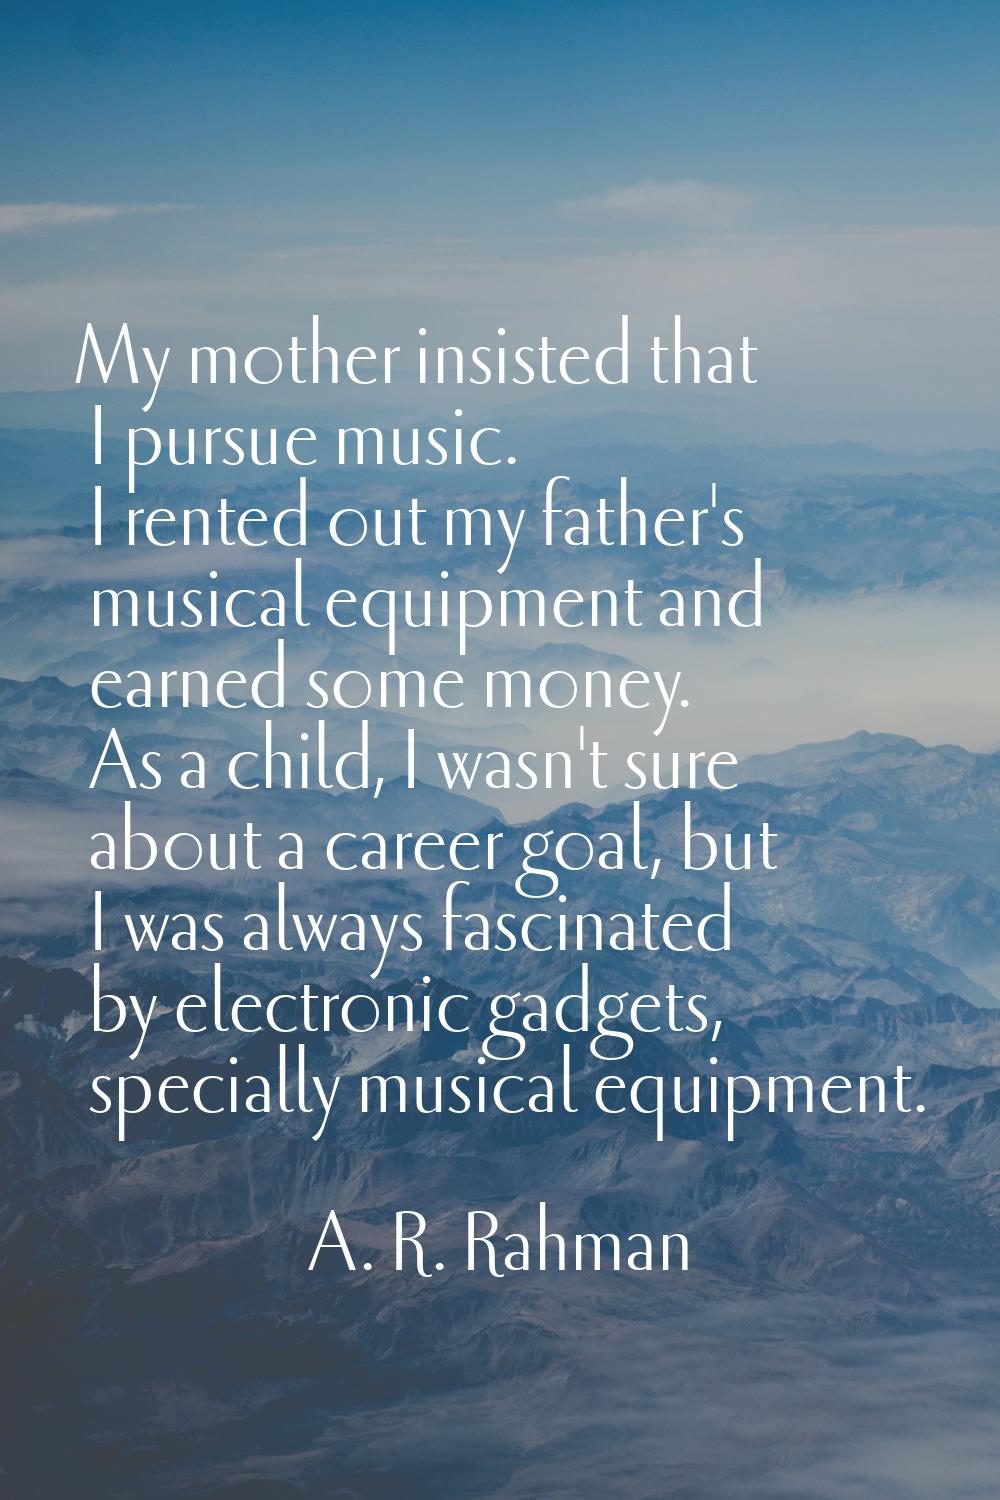 My mother insisted that I pursue music. I rented out my father's musical equipment and earned some 